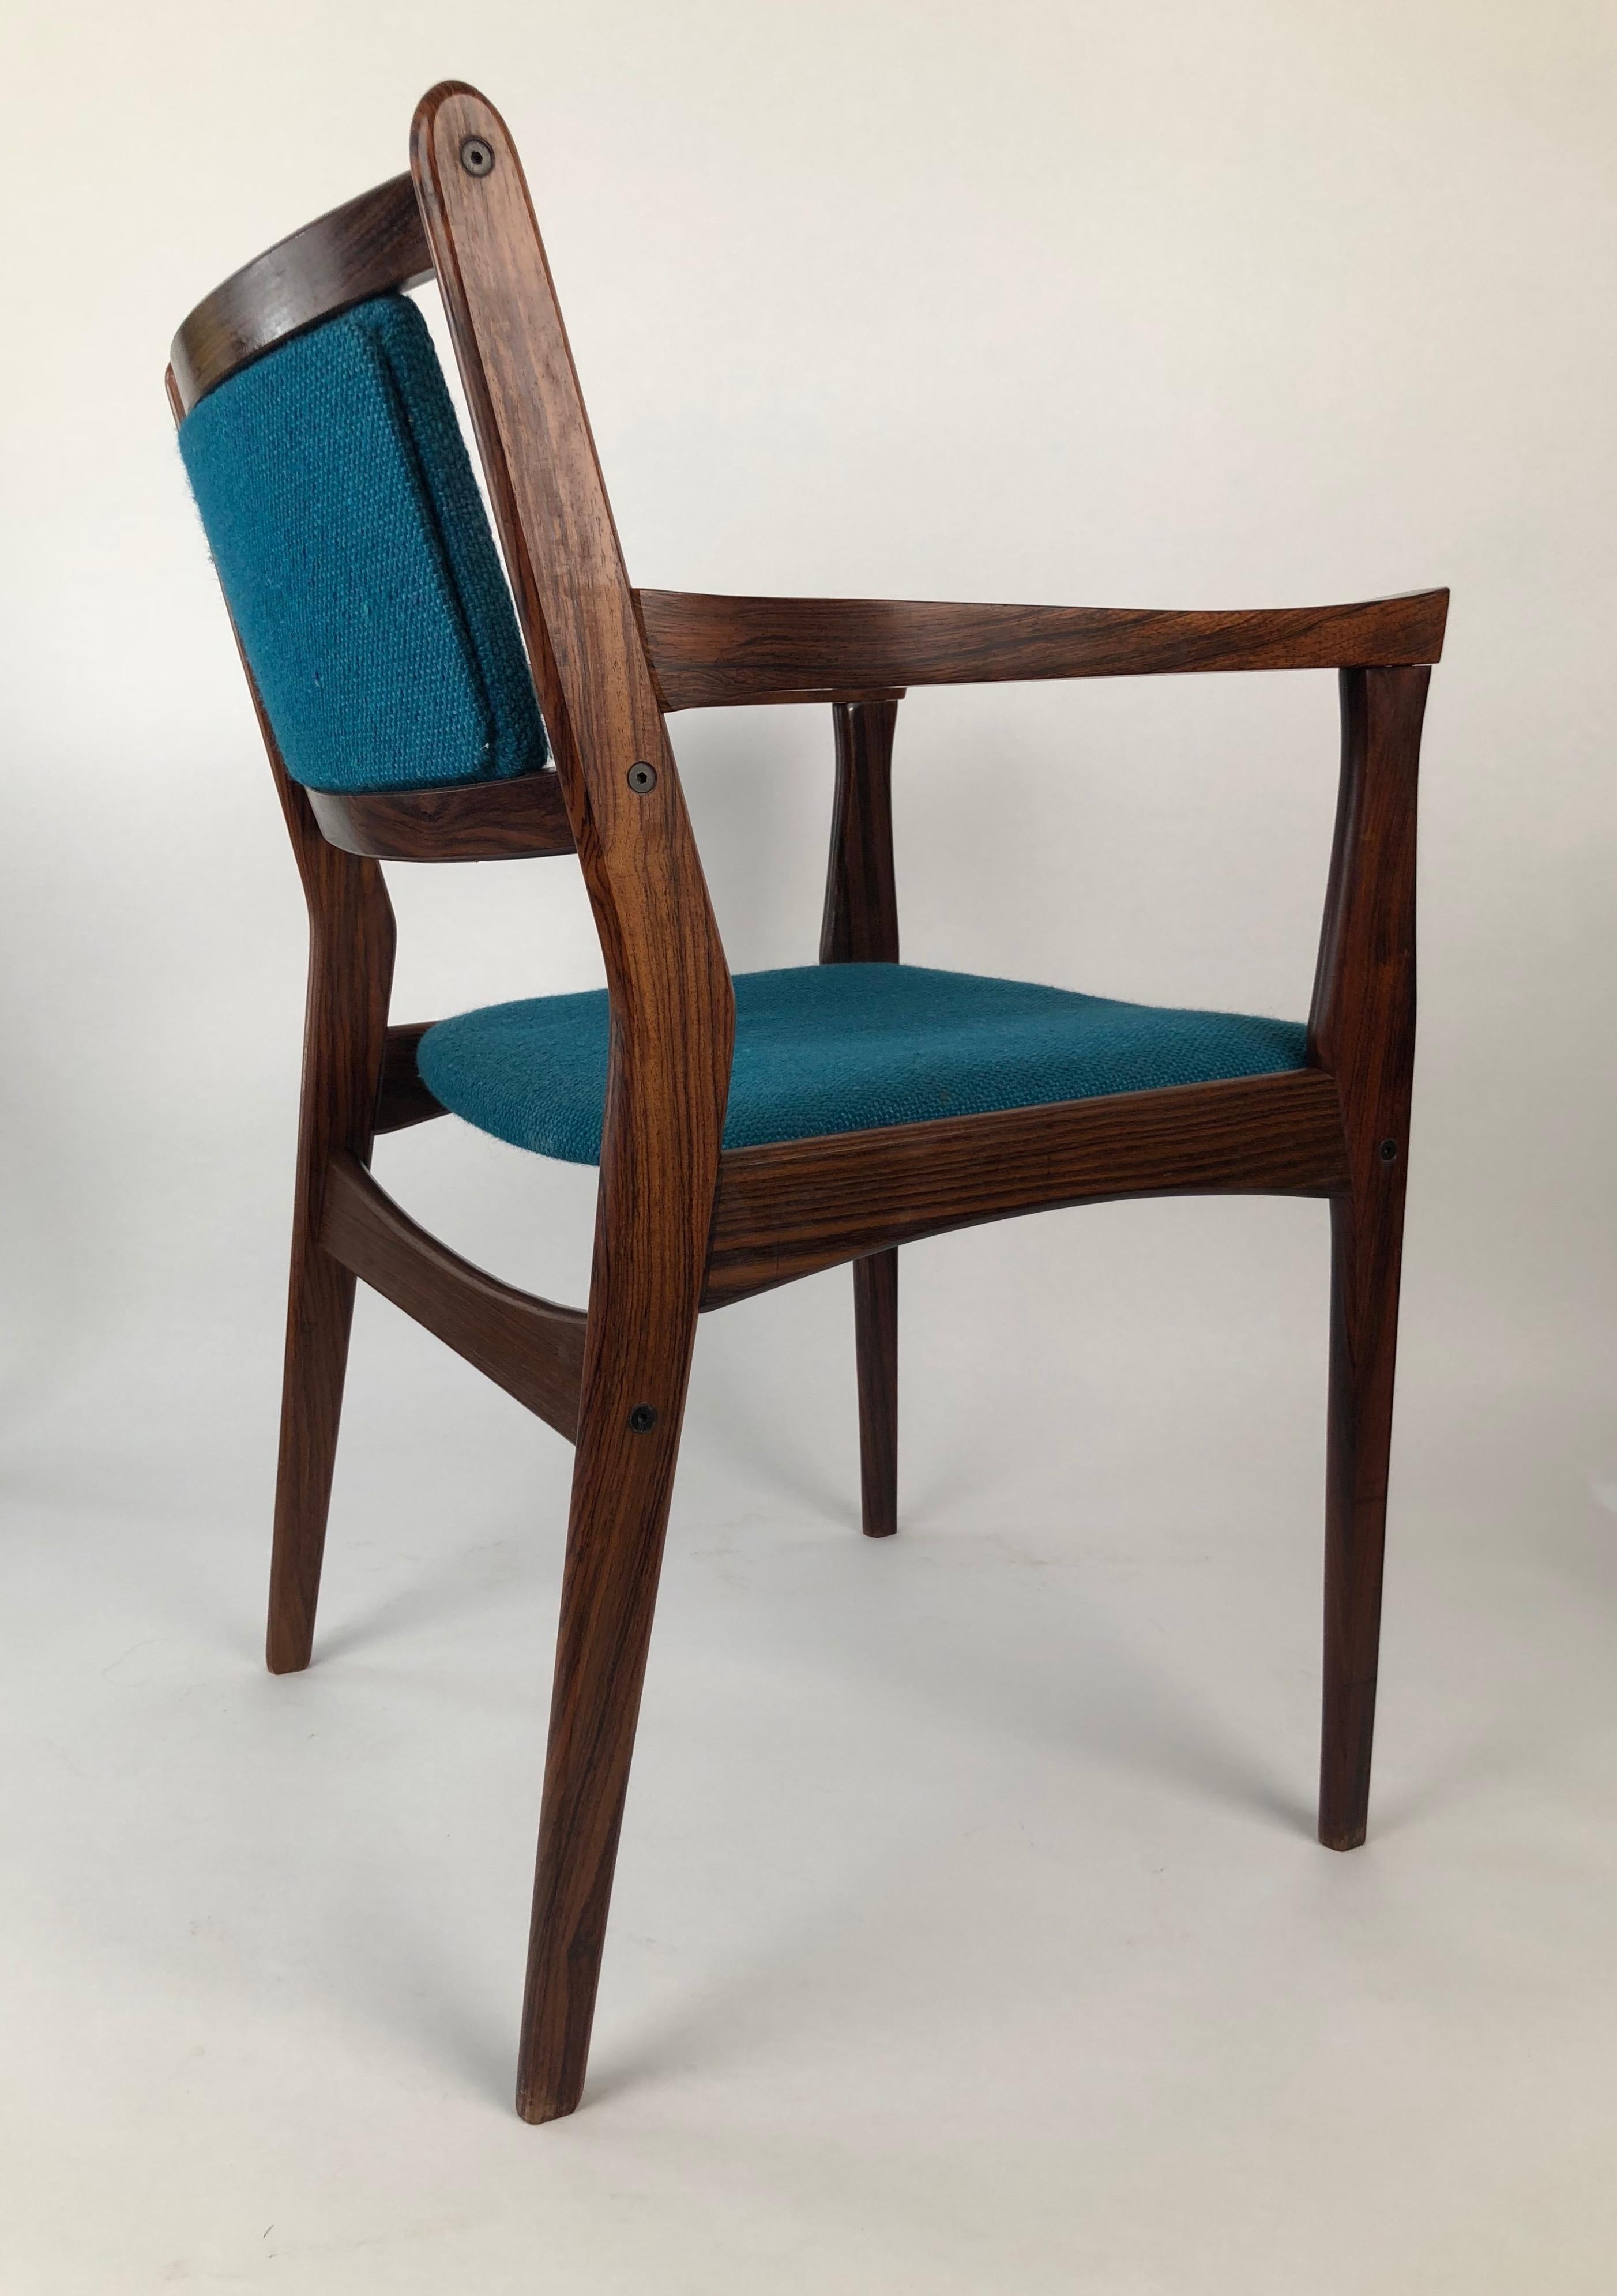 Mid-20th Century Set of Two Palisander Chairs with Turquoise Fabric from the 1960s For Sale